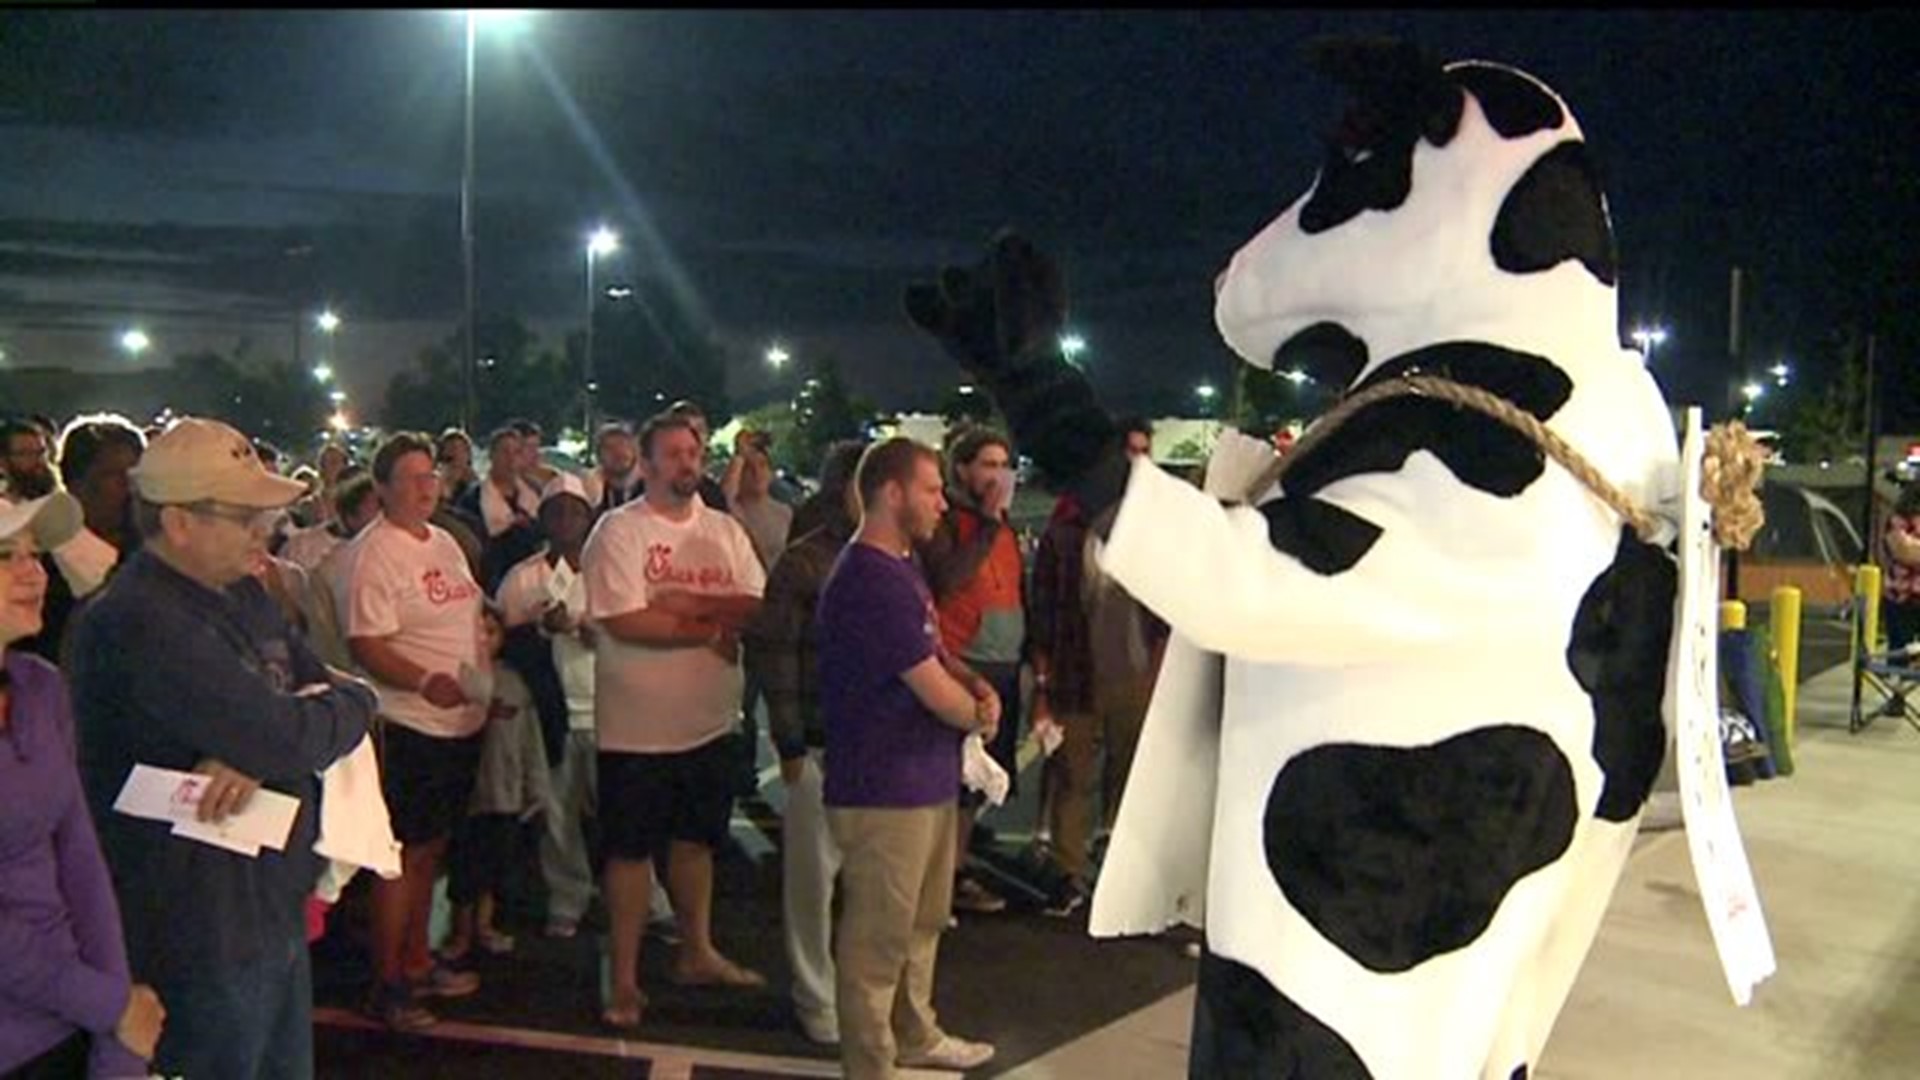 Chick-fil-A Moline opening